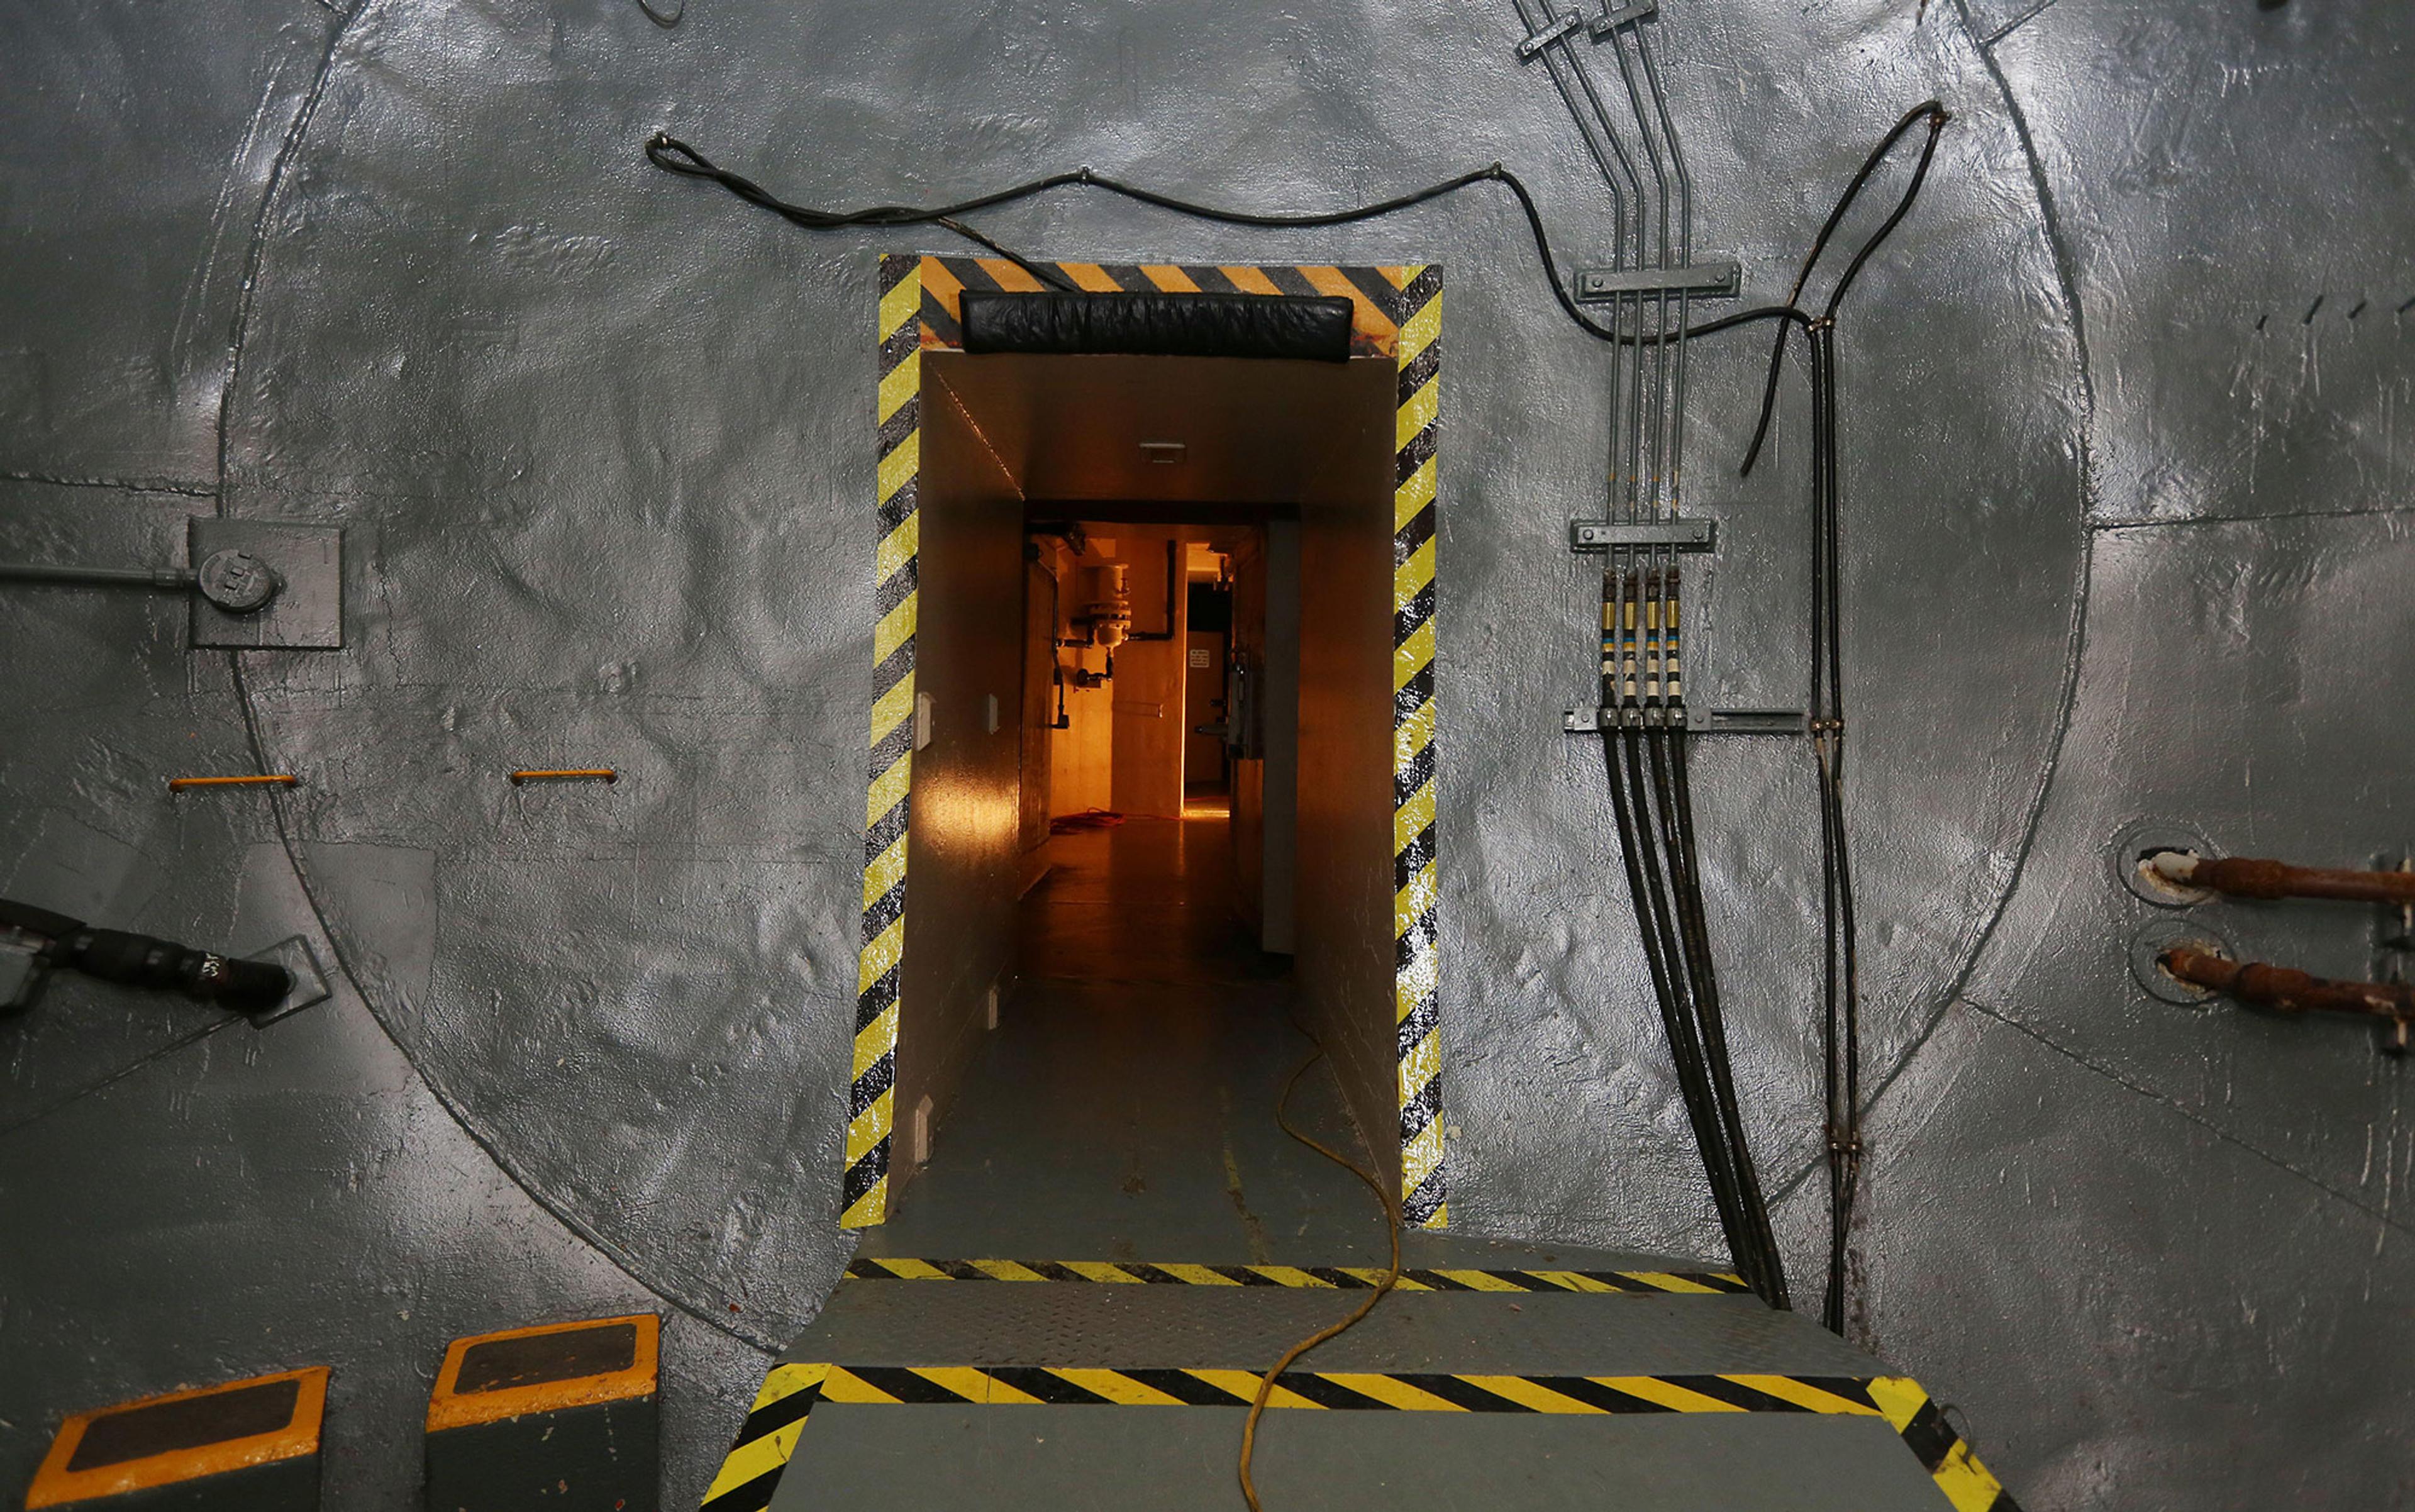 A doorway within a metallic-like surface surrounded by hazard tape leads to a low-lit tunnel